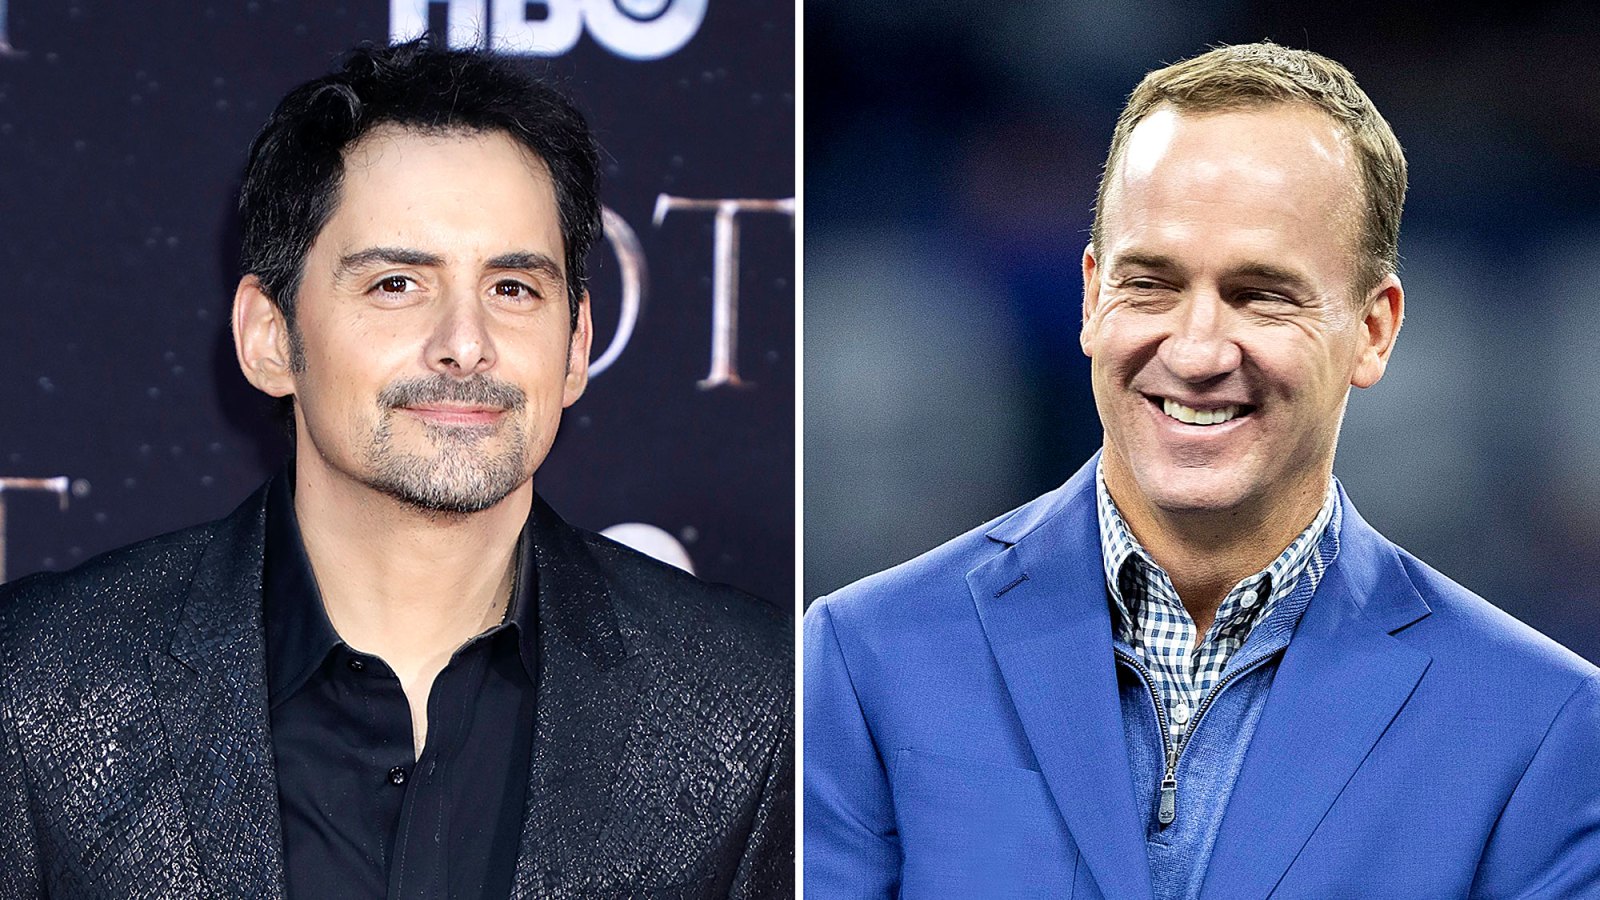 Brad Paisley Gets Roasted Upcoming ABC Special Peyton Manning